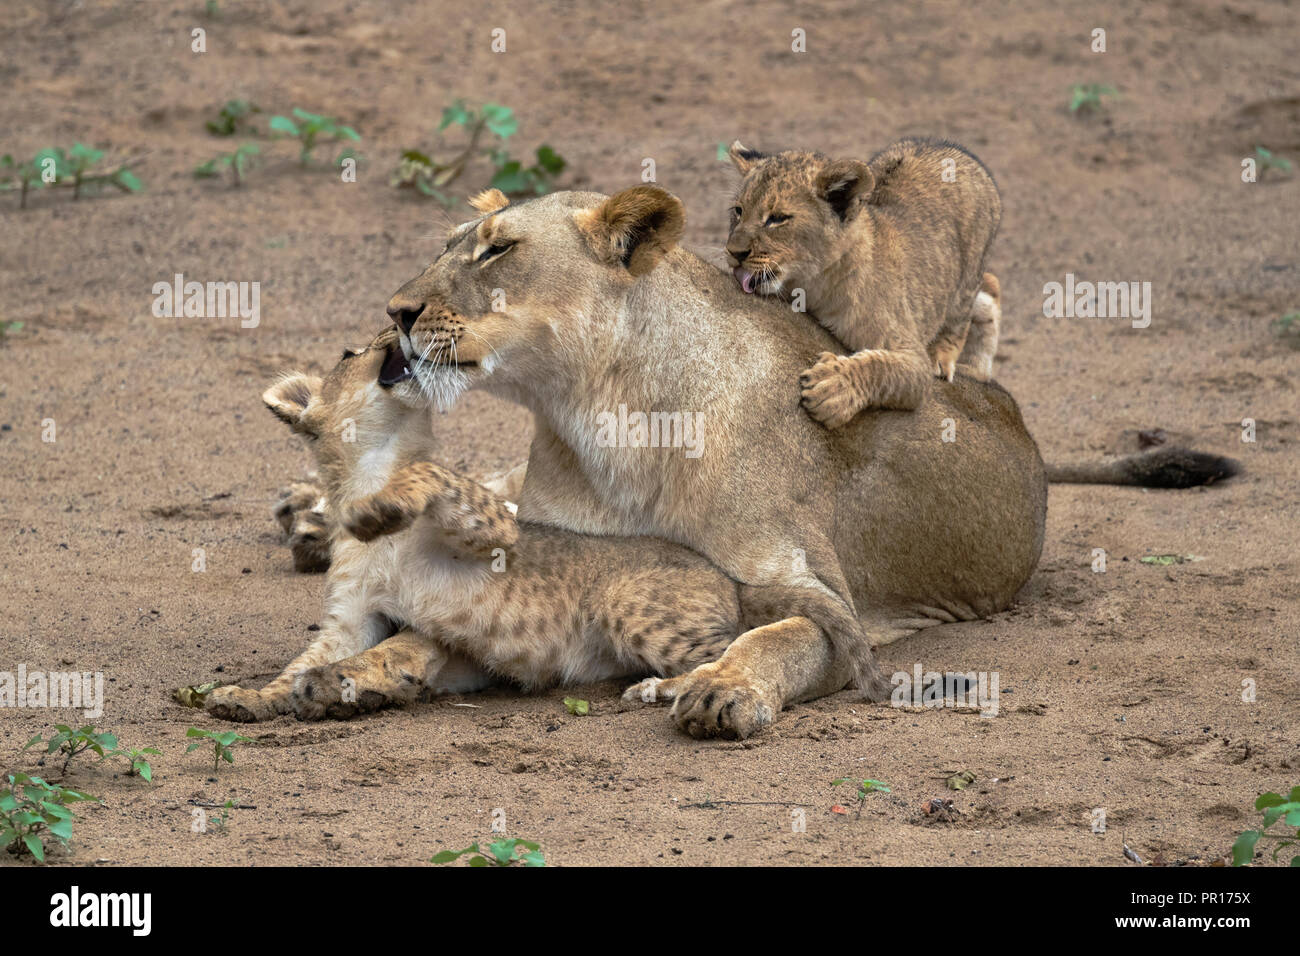 Lioness (Panthera leo) playing and bonding with cubs, Zimanga Private Game Reserve, KwaZulu-Natal, South Africa, Africa Stock Photo